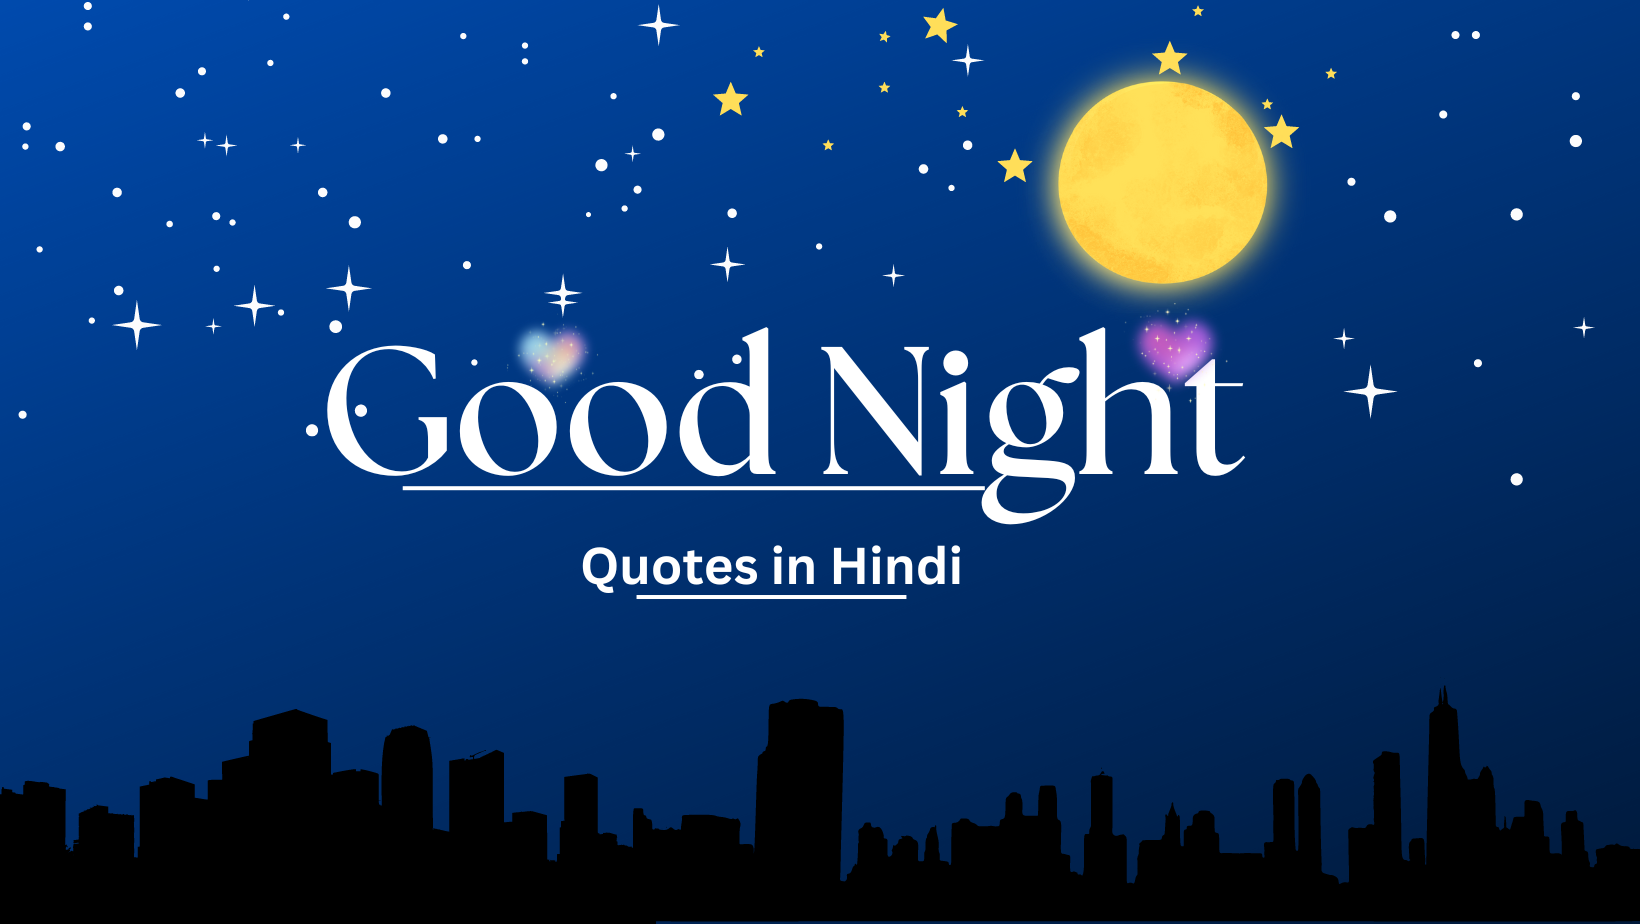 Good Night Quotes and Wishes with Images for friends in Hindi - EnglsihtoHindis